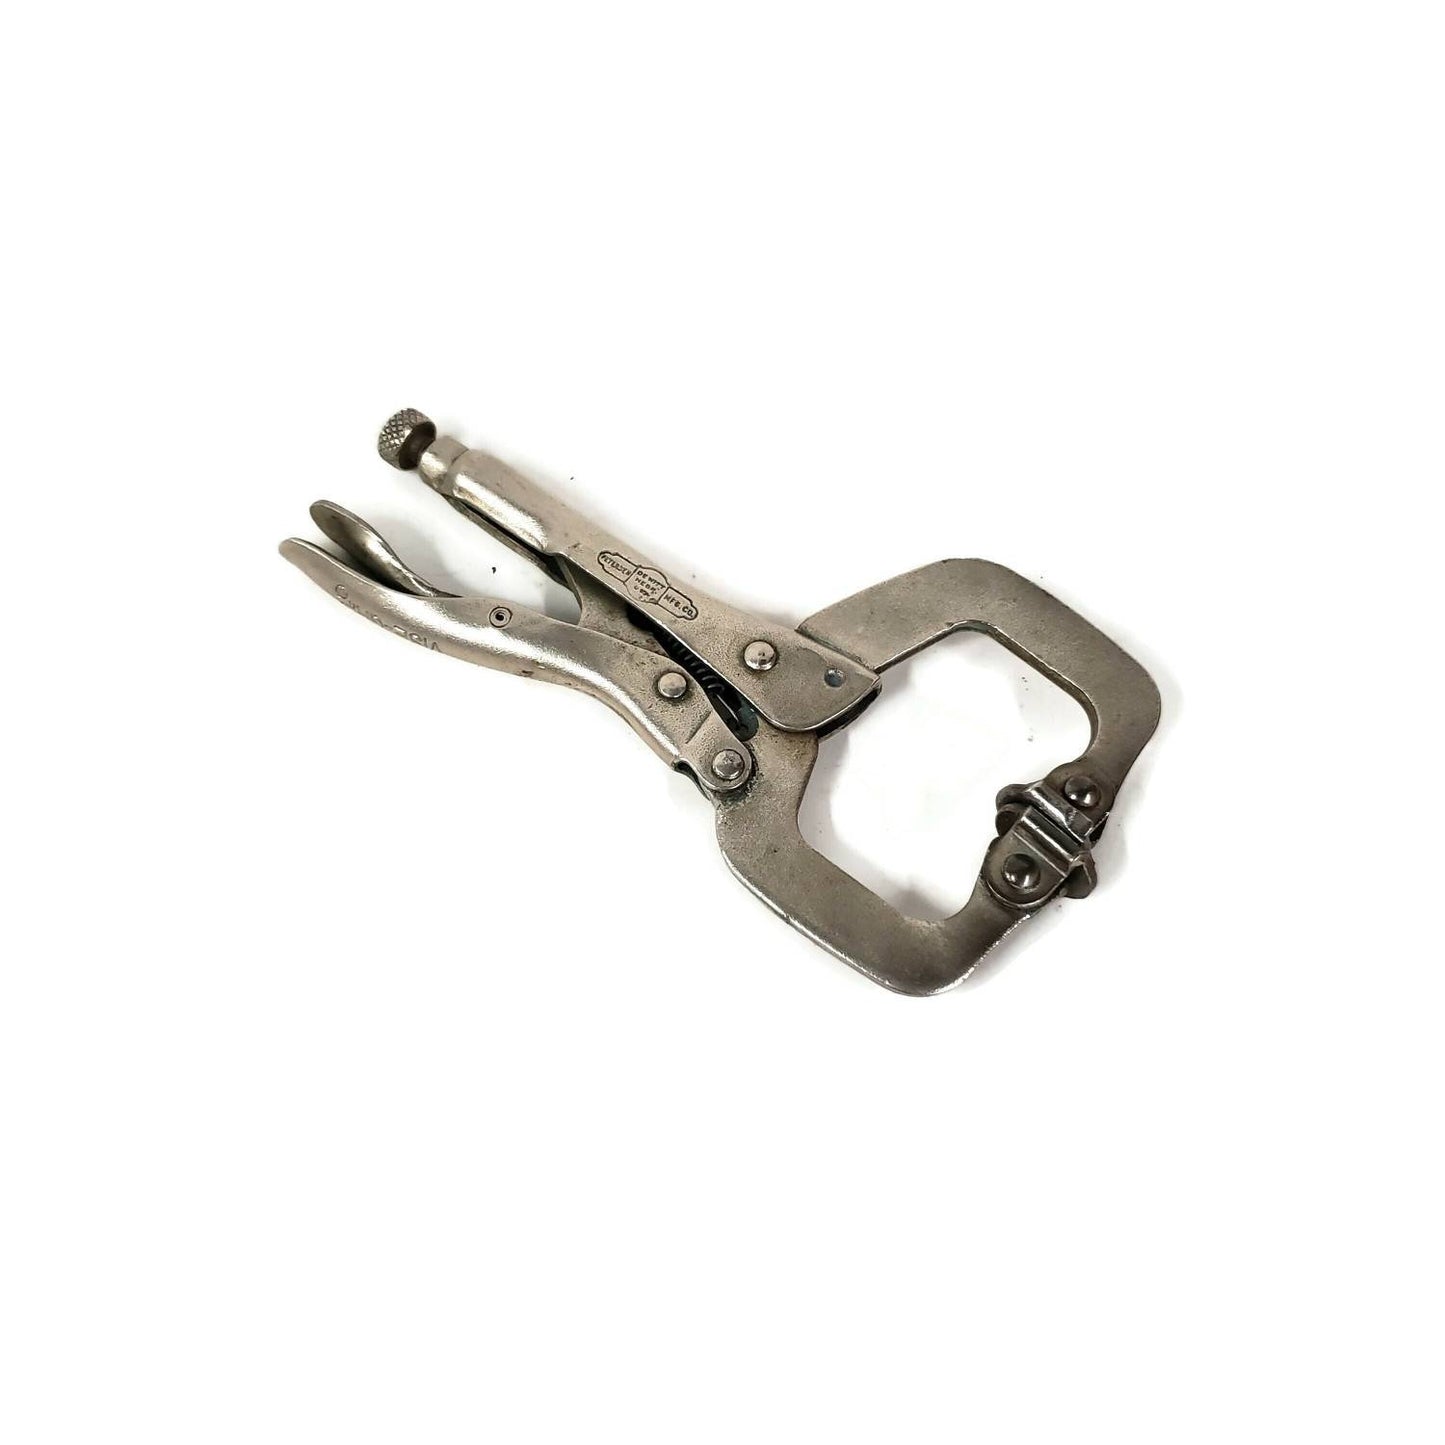 vise-grip welding clamp long arm locking jaw hand tools pliers